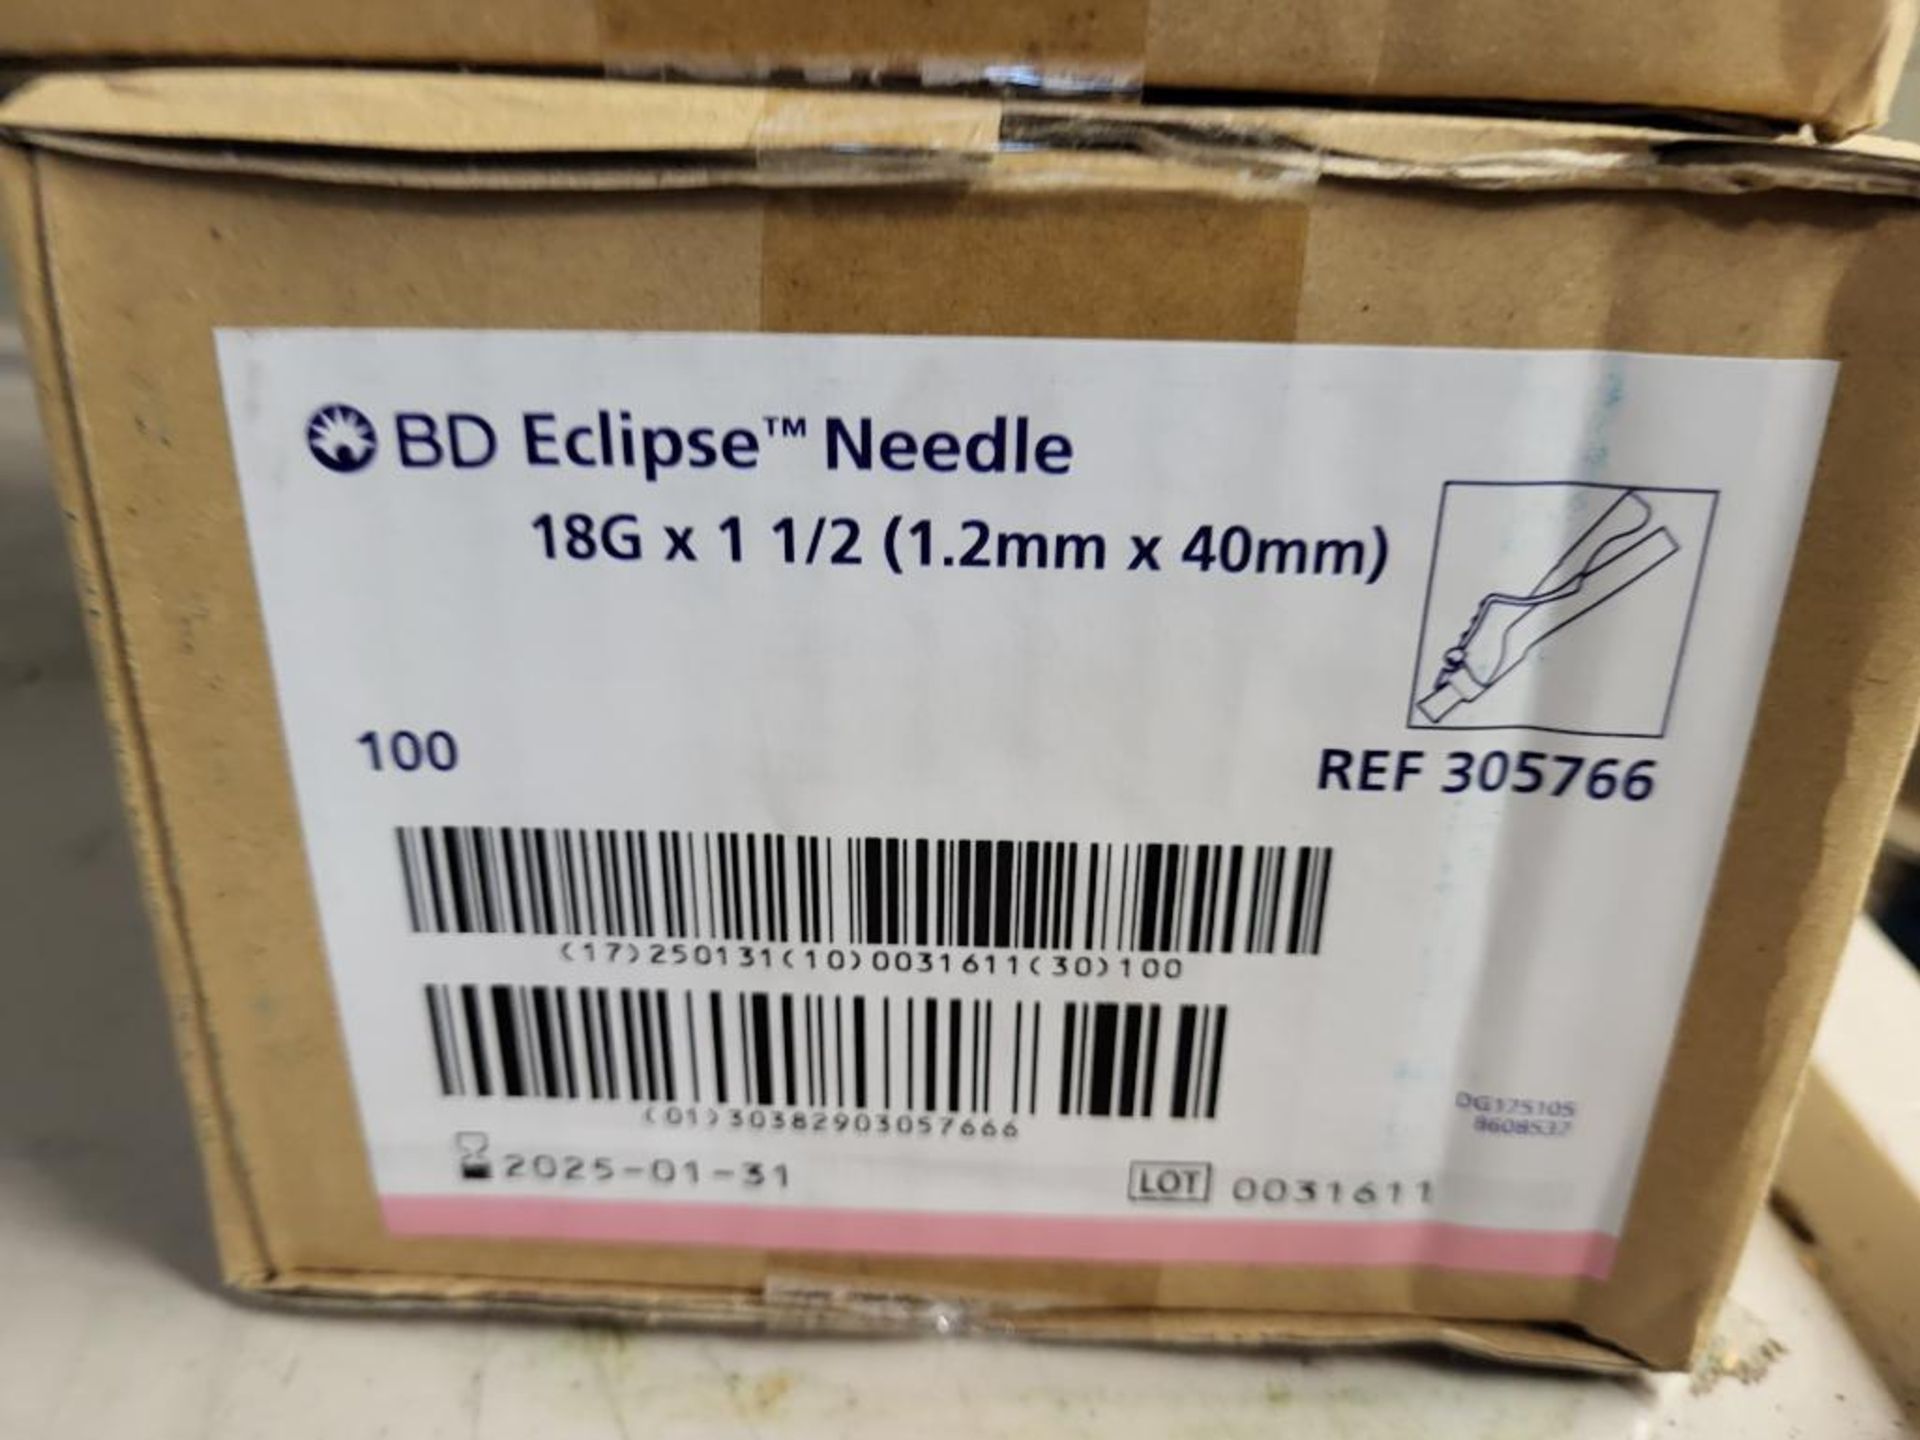 New Boxes of 100 BD Eclipse Needles 18G x 1 1/2